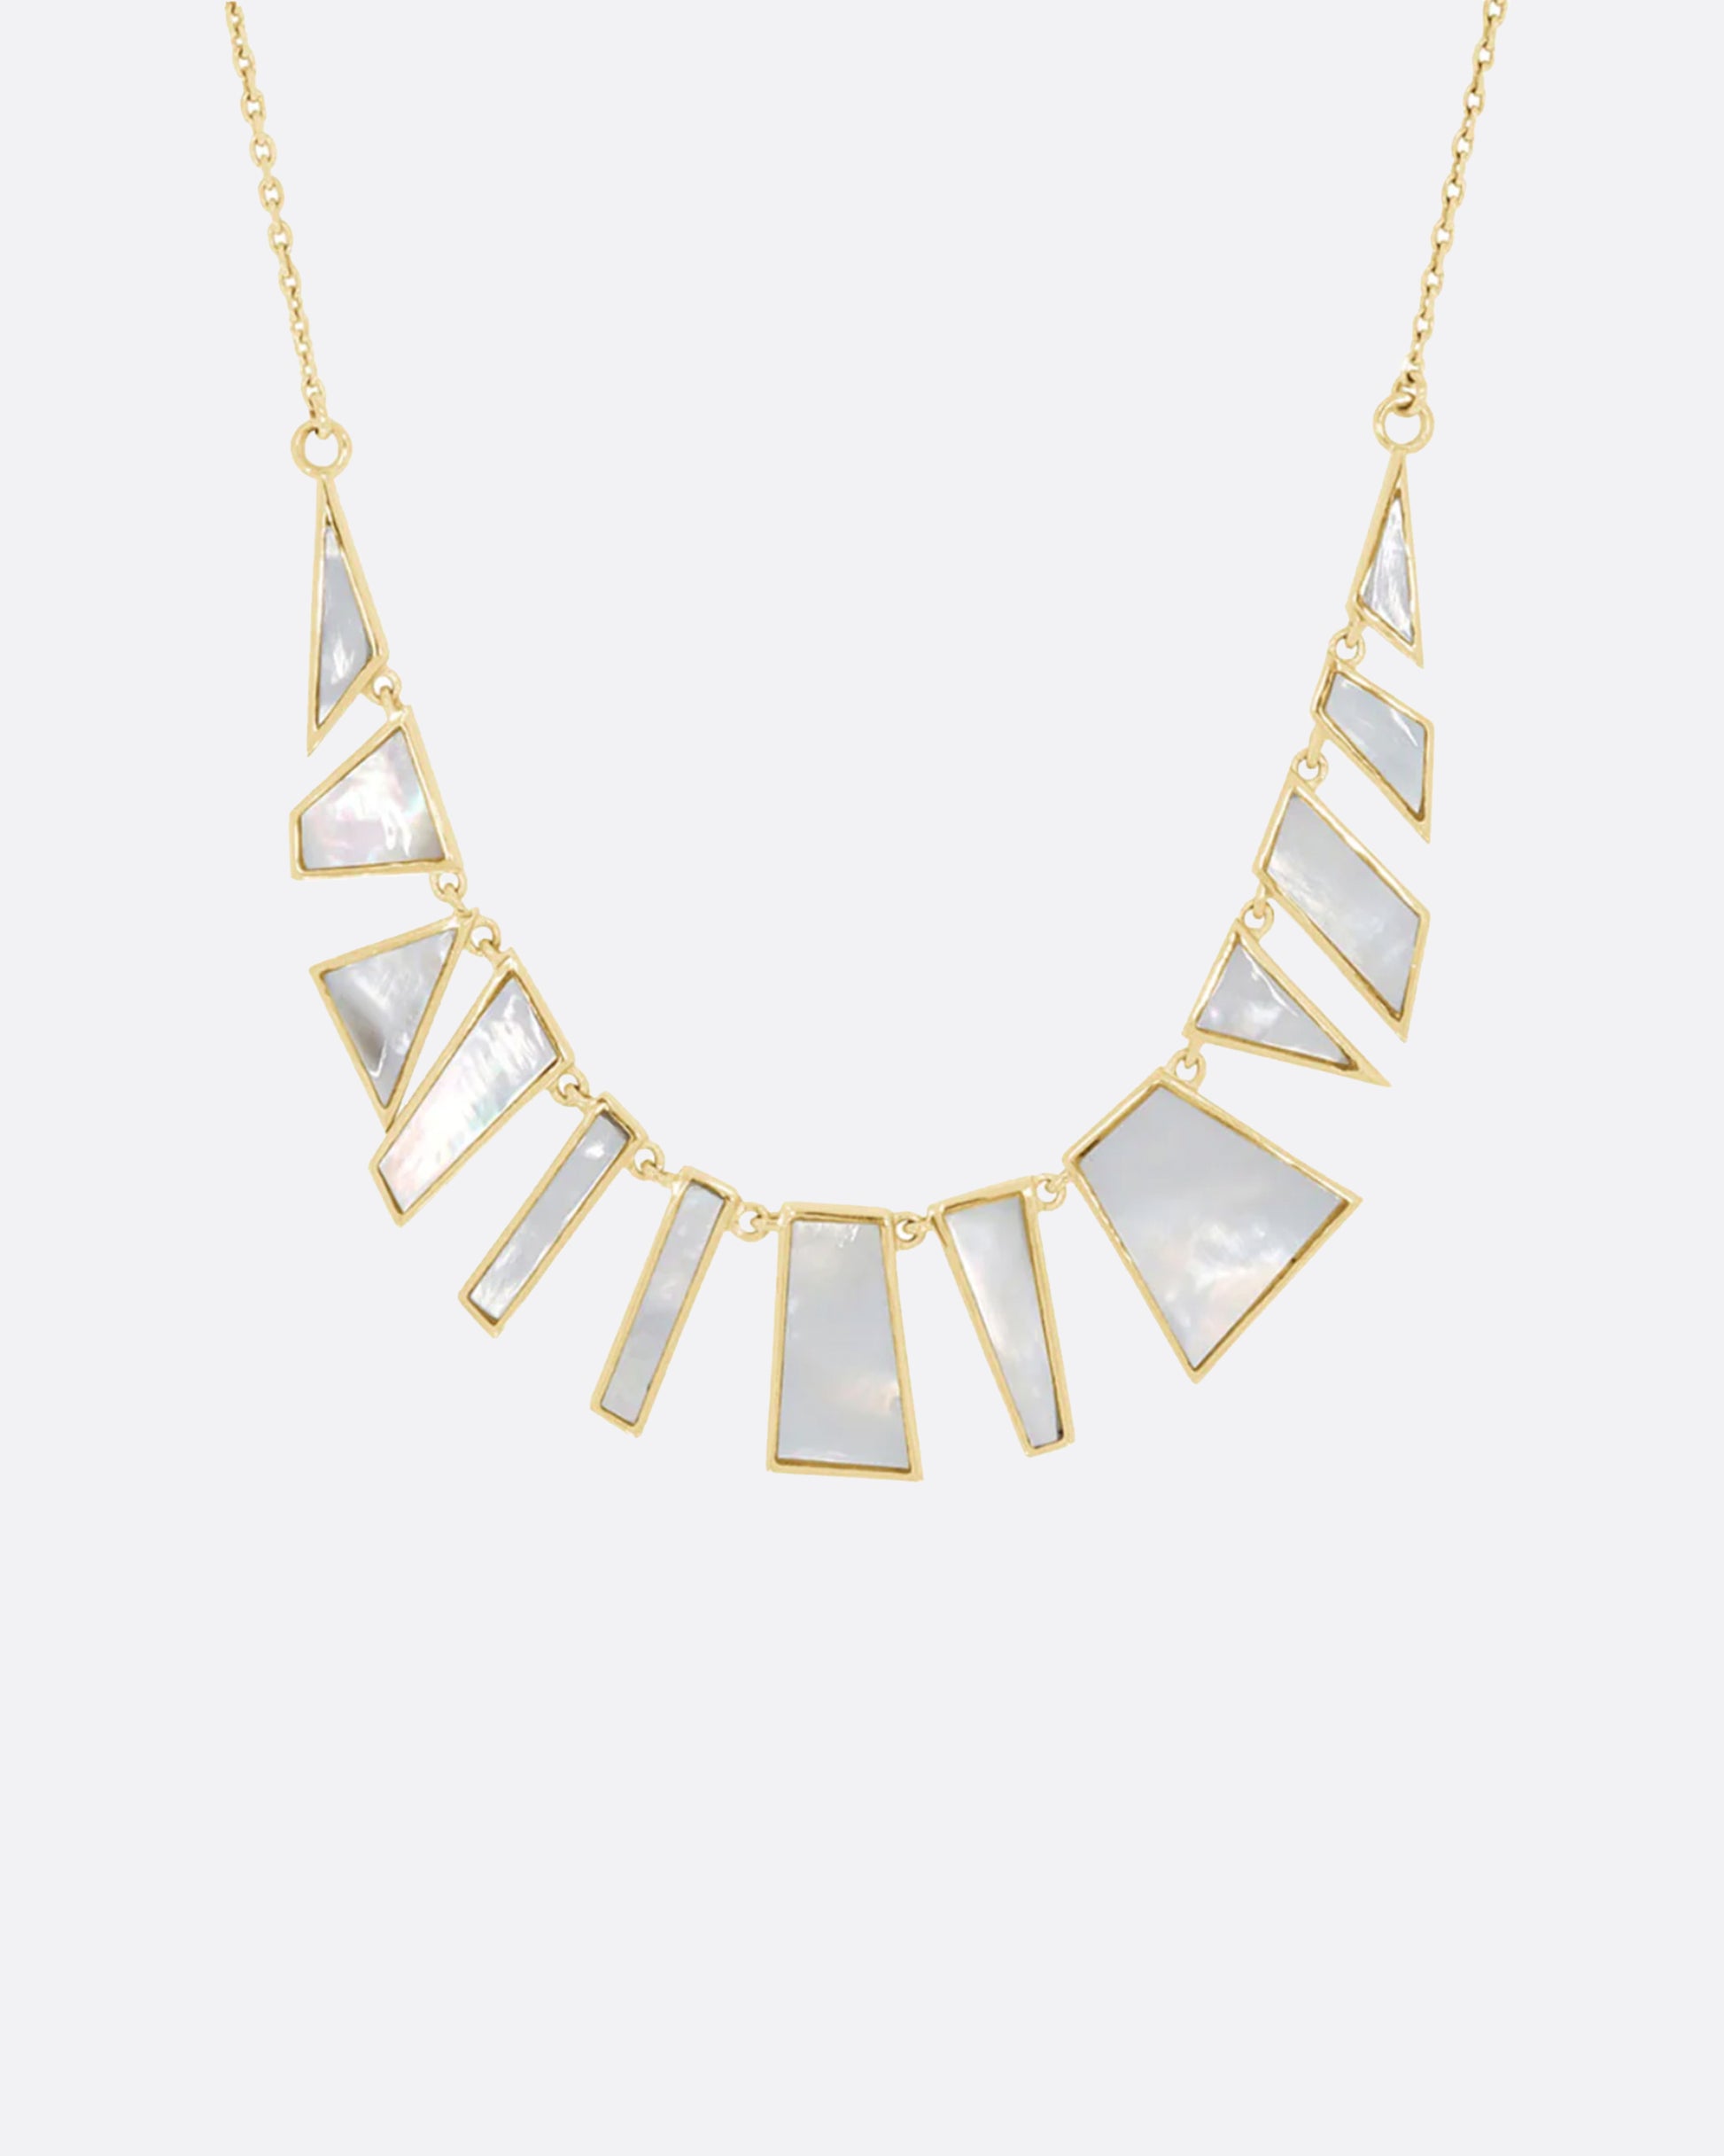 Inspired by a pair of earrings found while on vacation, this necklace reflects light with its iridescent white sections.